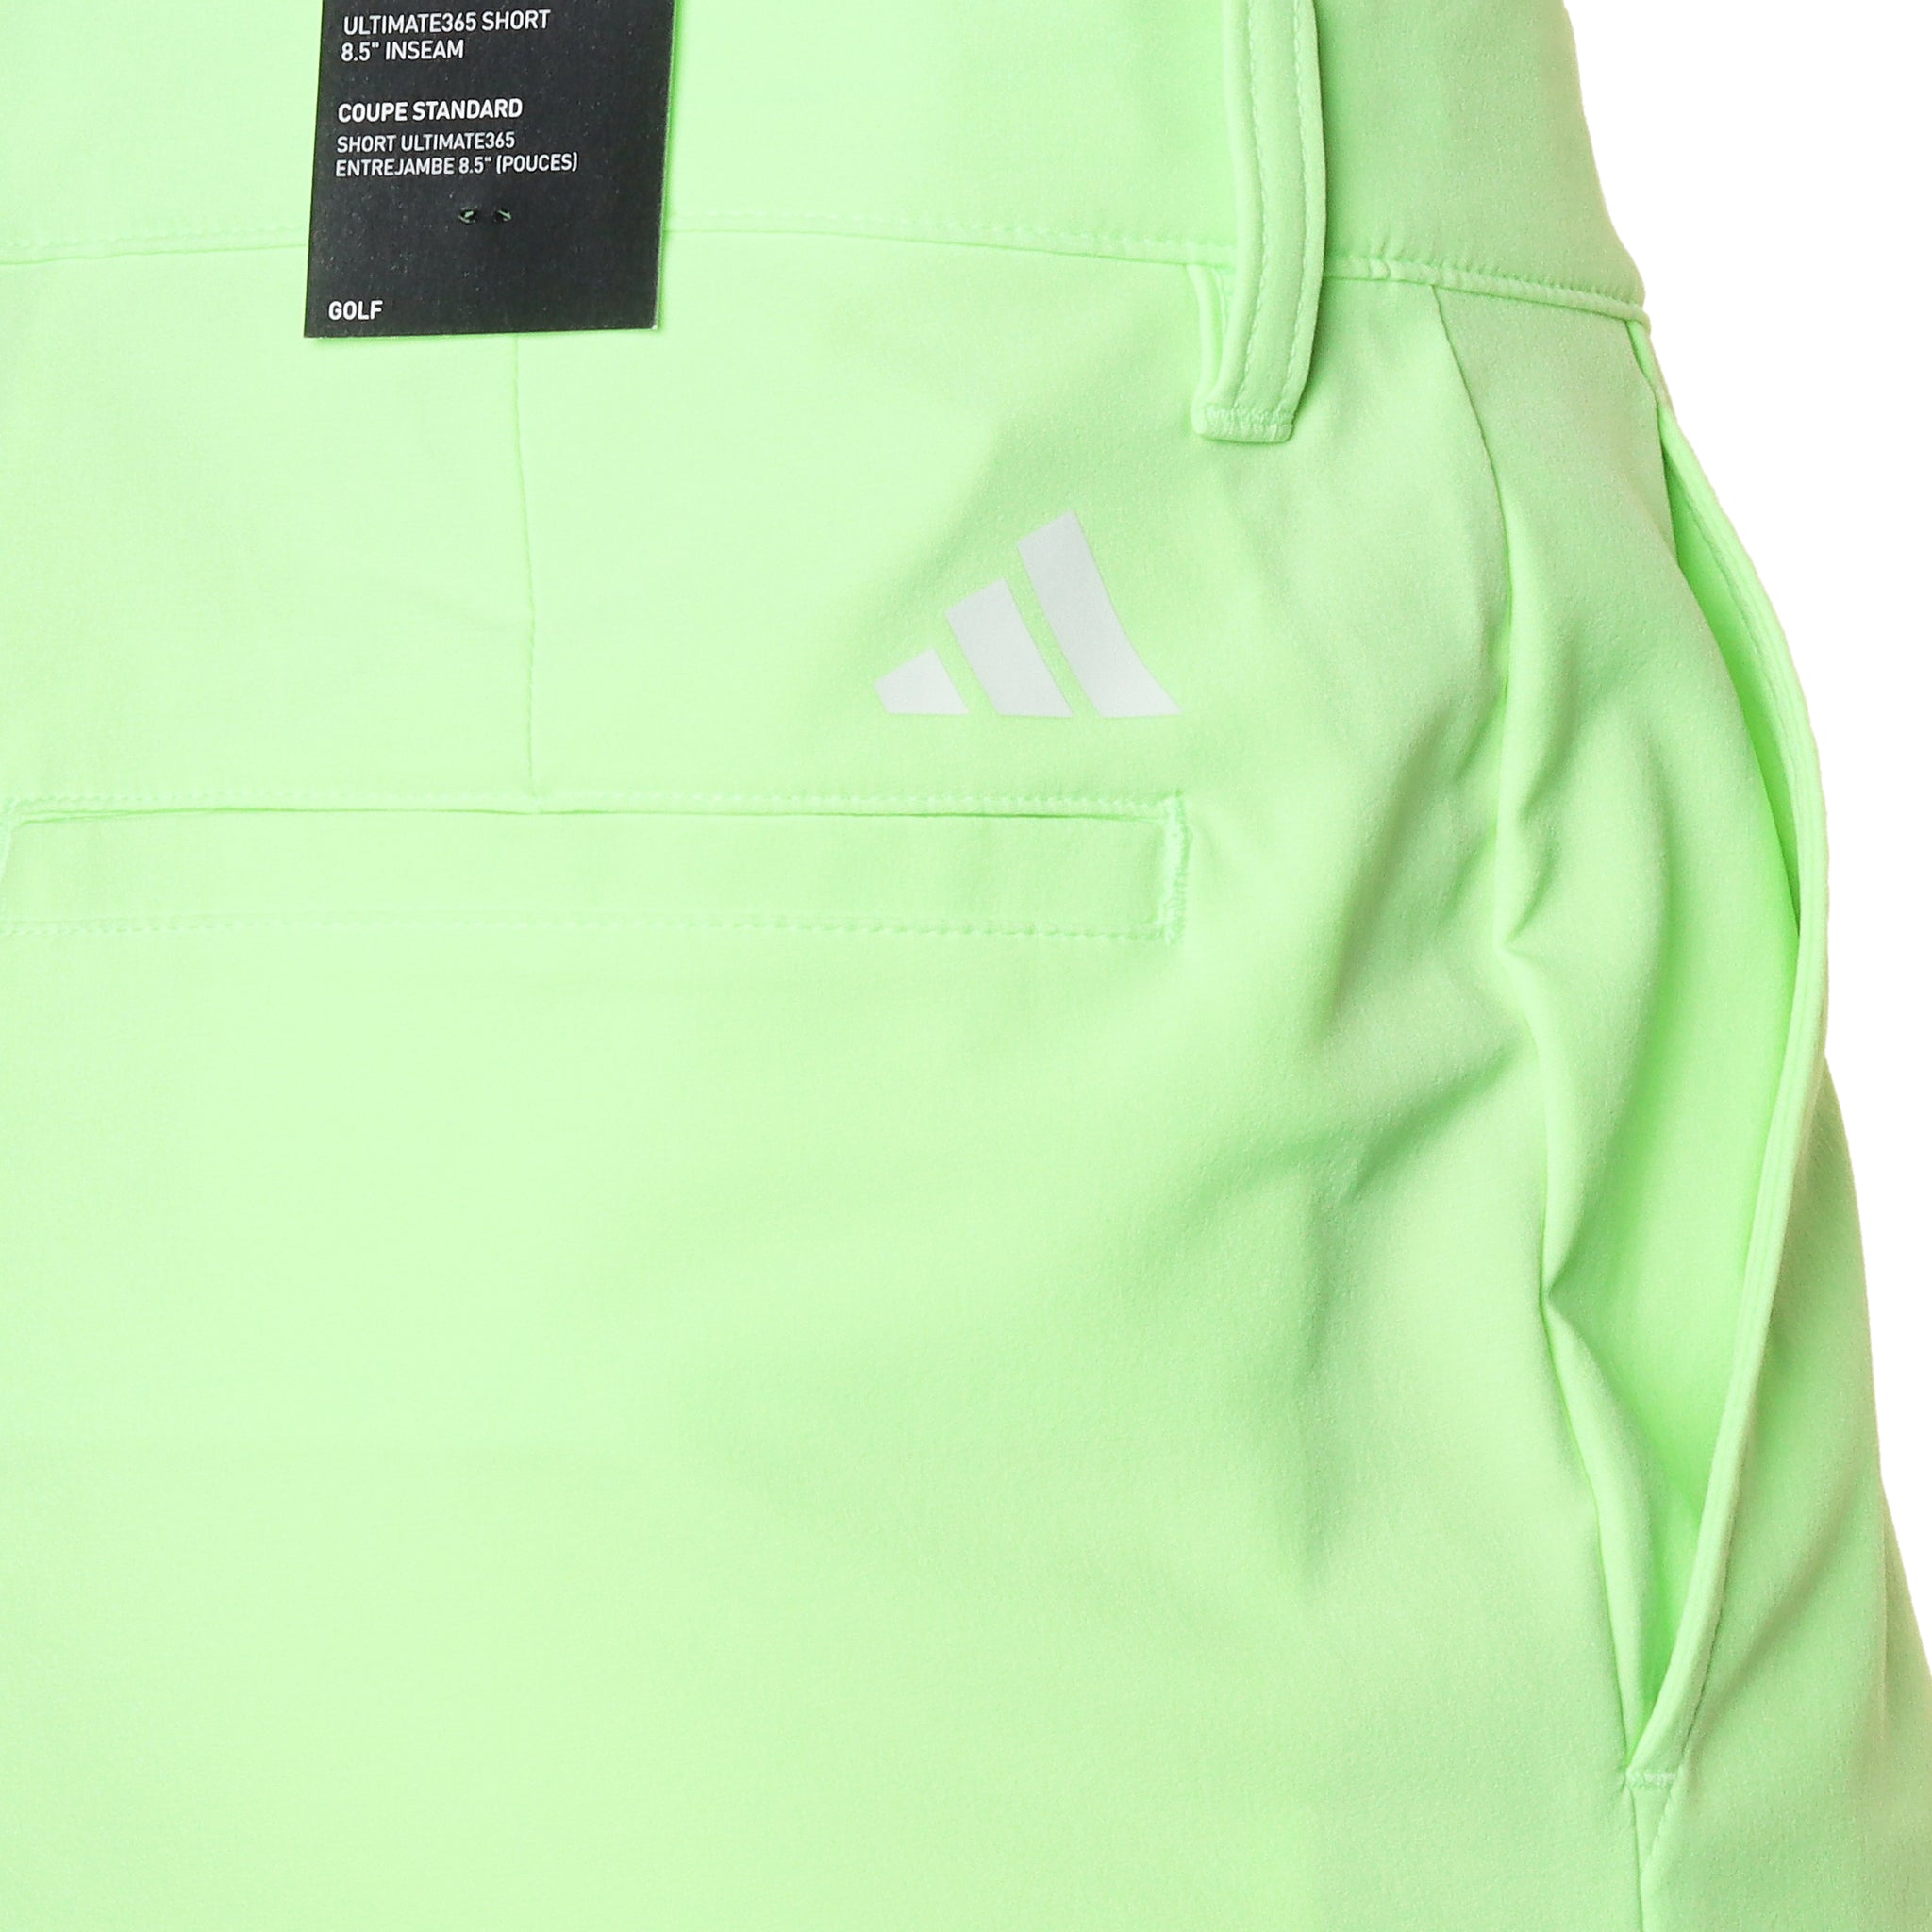 adidas-golf-ultimate365-8-5-shorts-in2465-green-spark